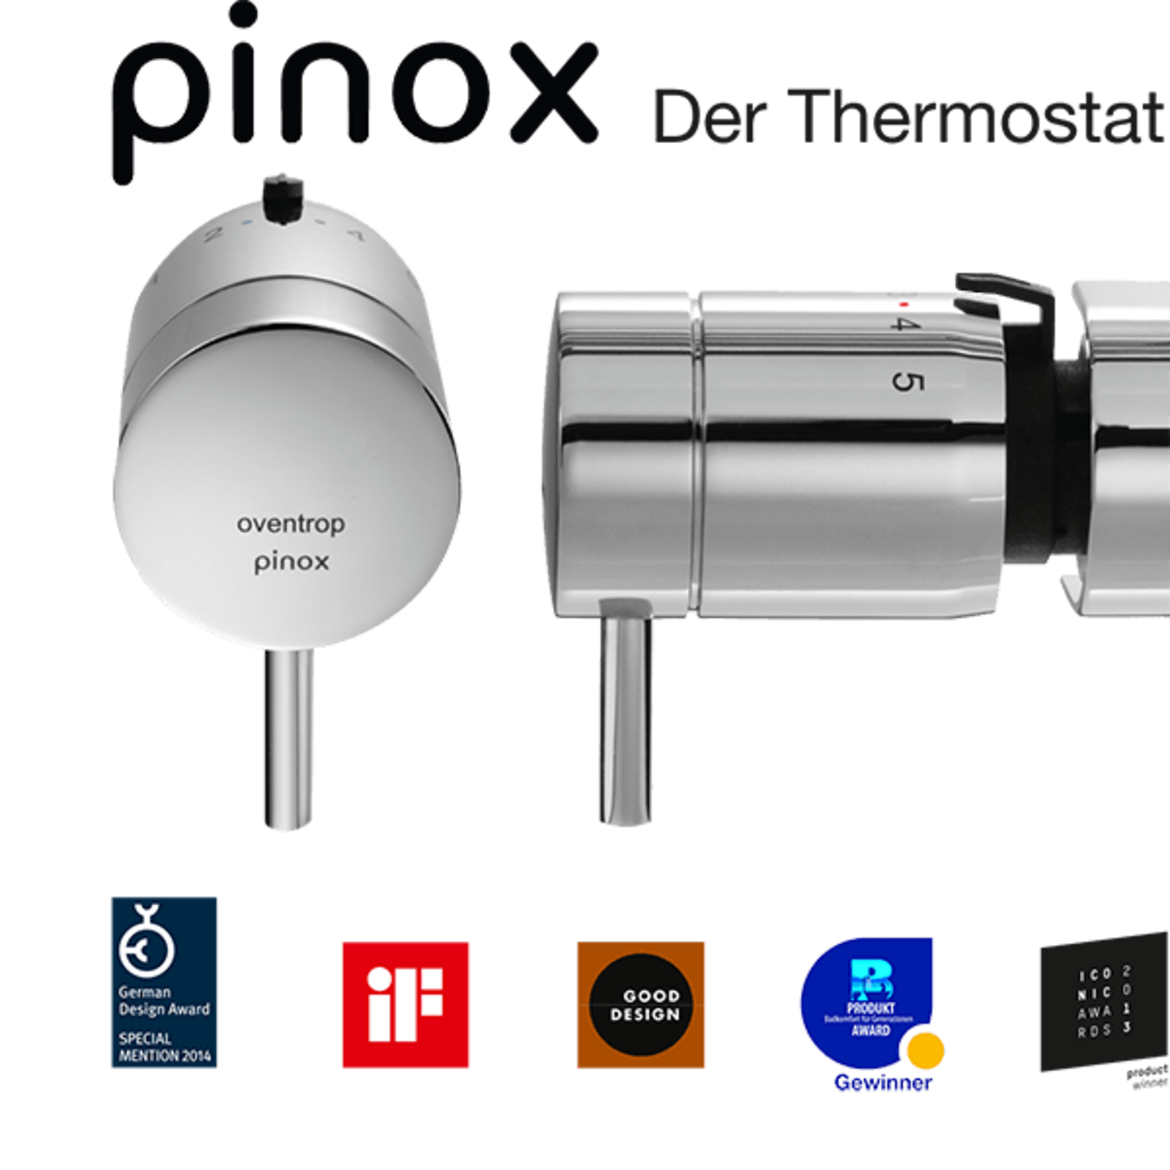 pinox. The Thermostat